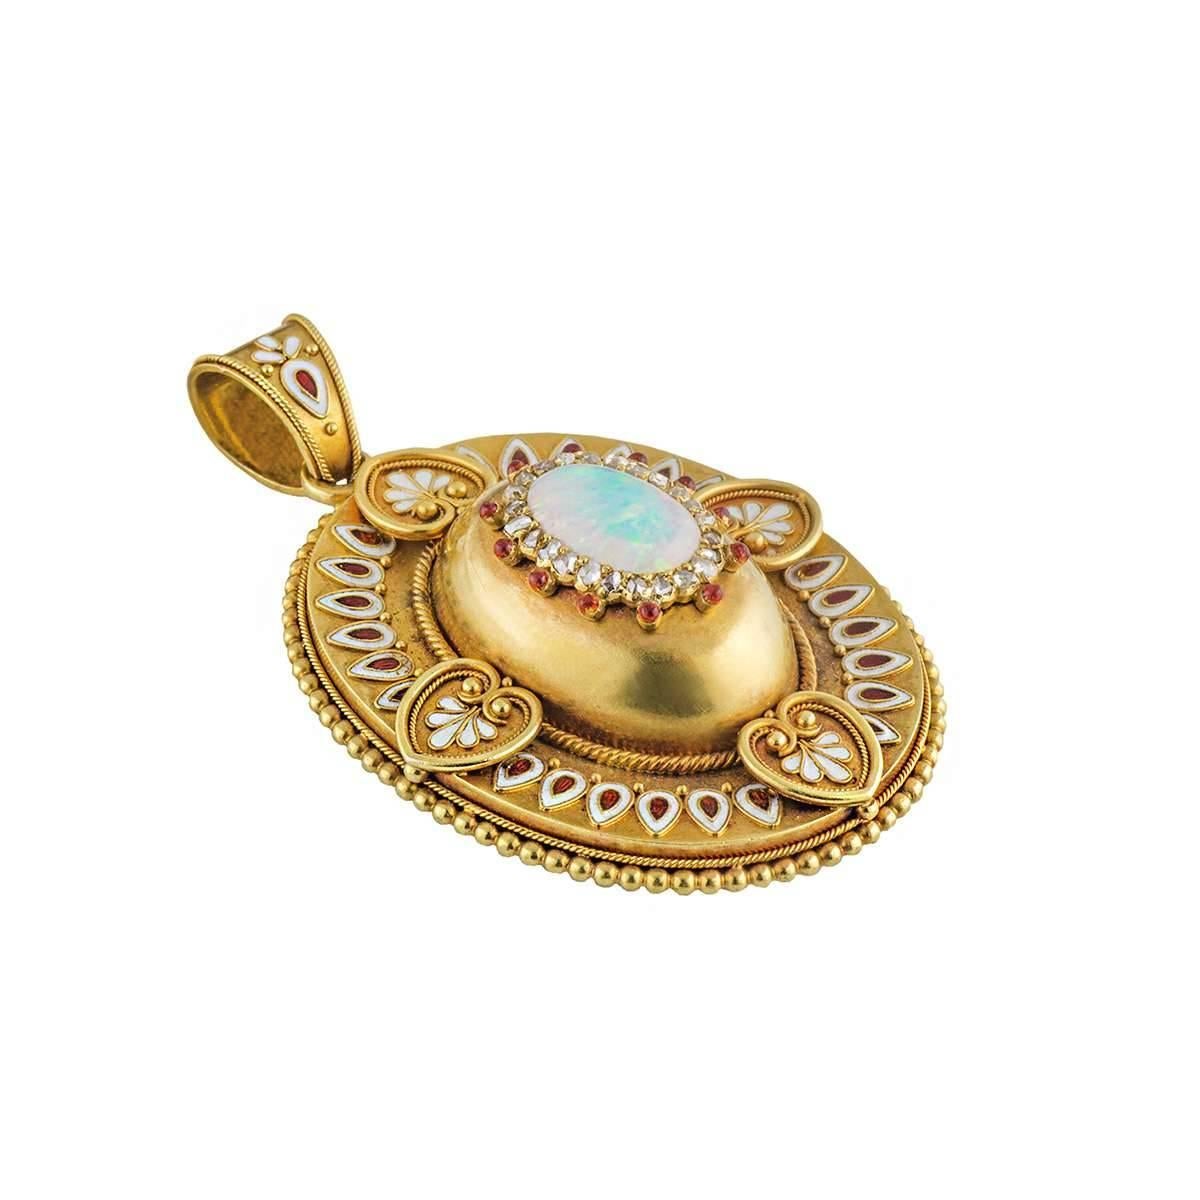 A stunning opal, diamond and enamel locket pendant, circa 1880's. The pendant is set to the centre with a raised dome set with a single cabochon opal, with a halo of 24 rose cut diamonds totalling approximately 0.48ct. The pendant has filigree red